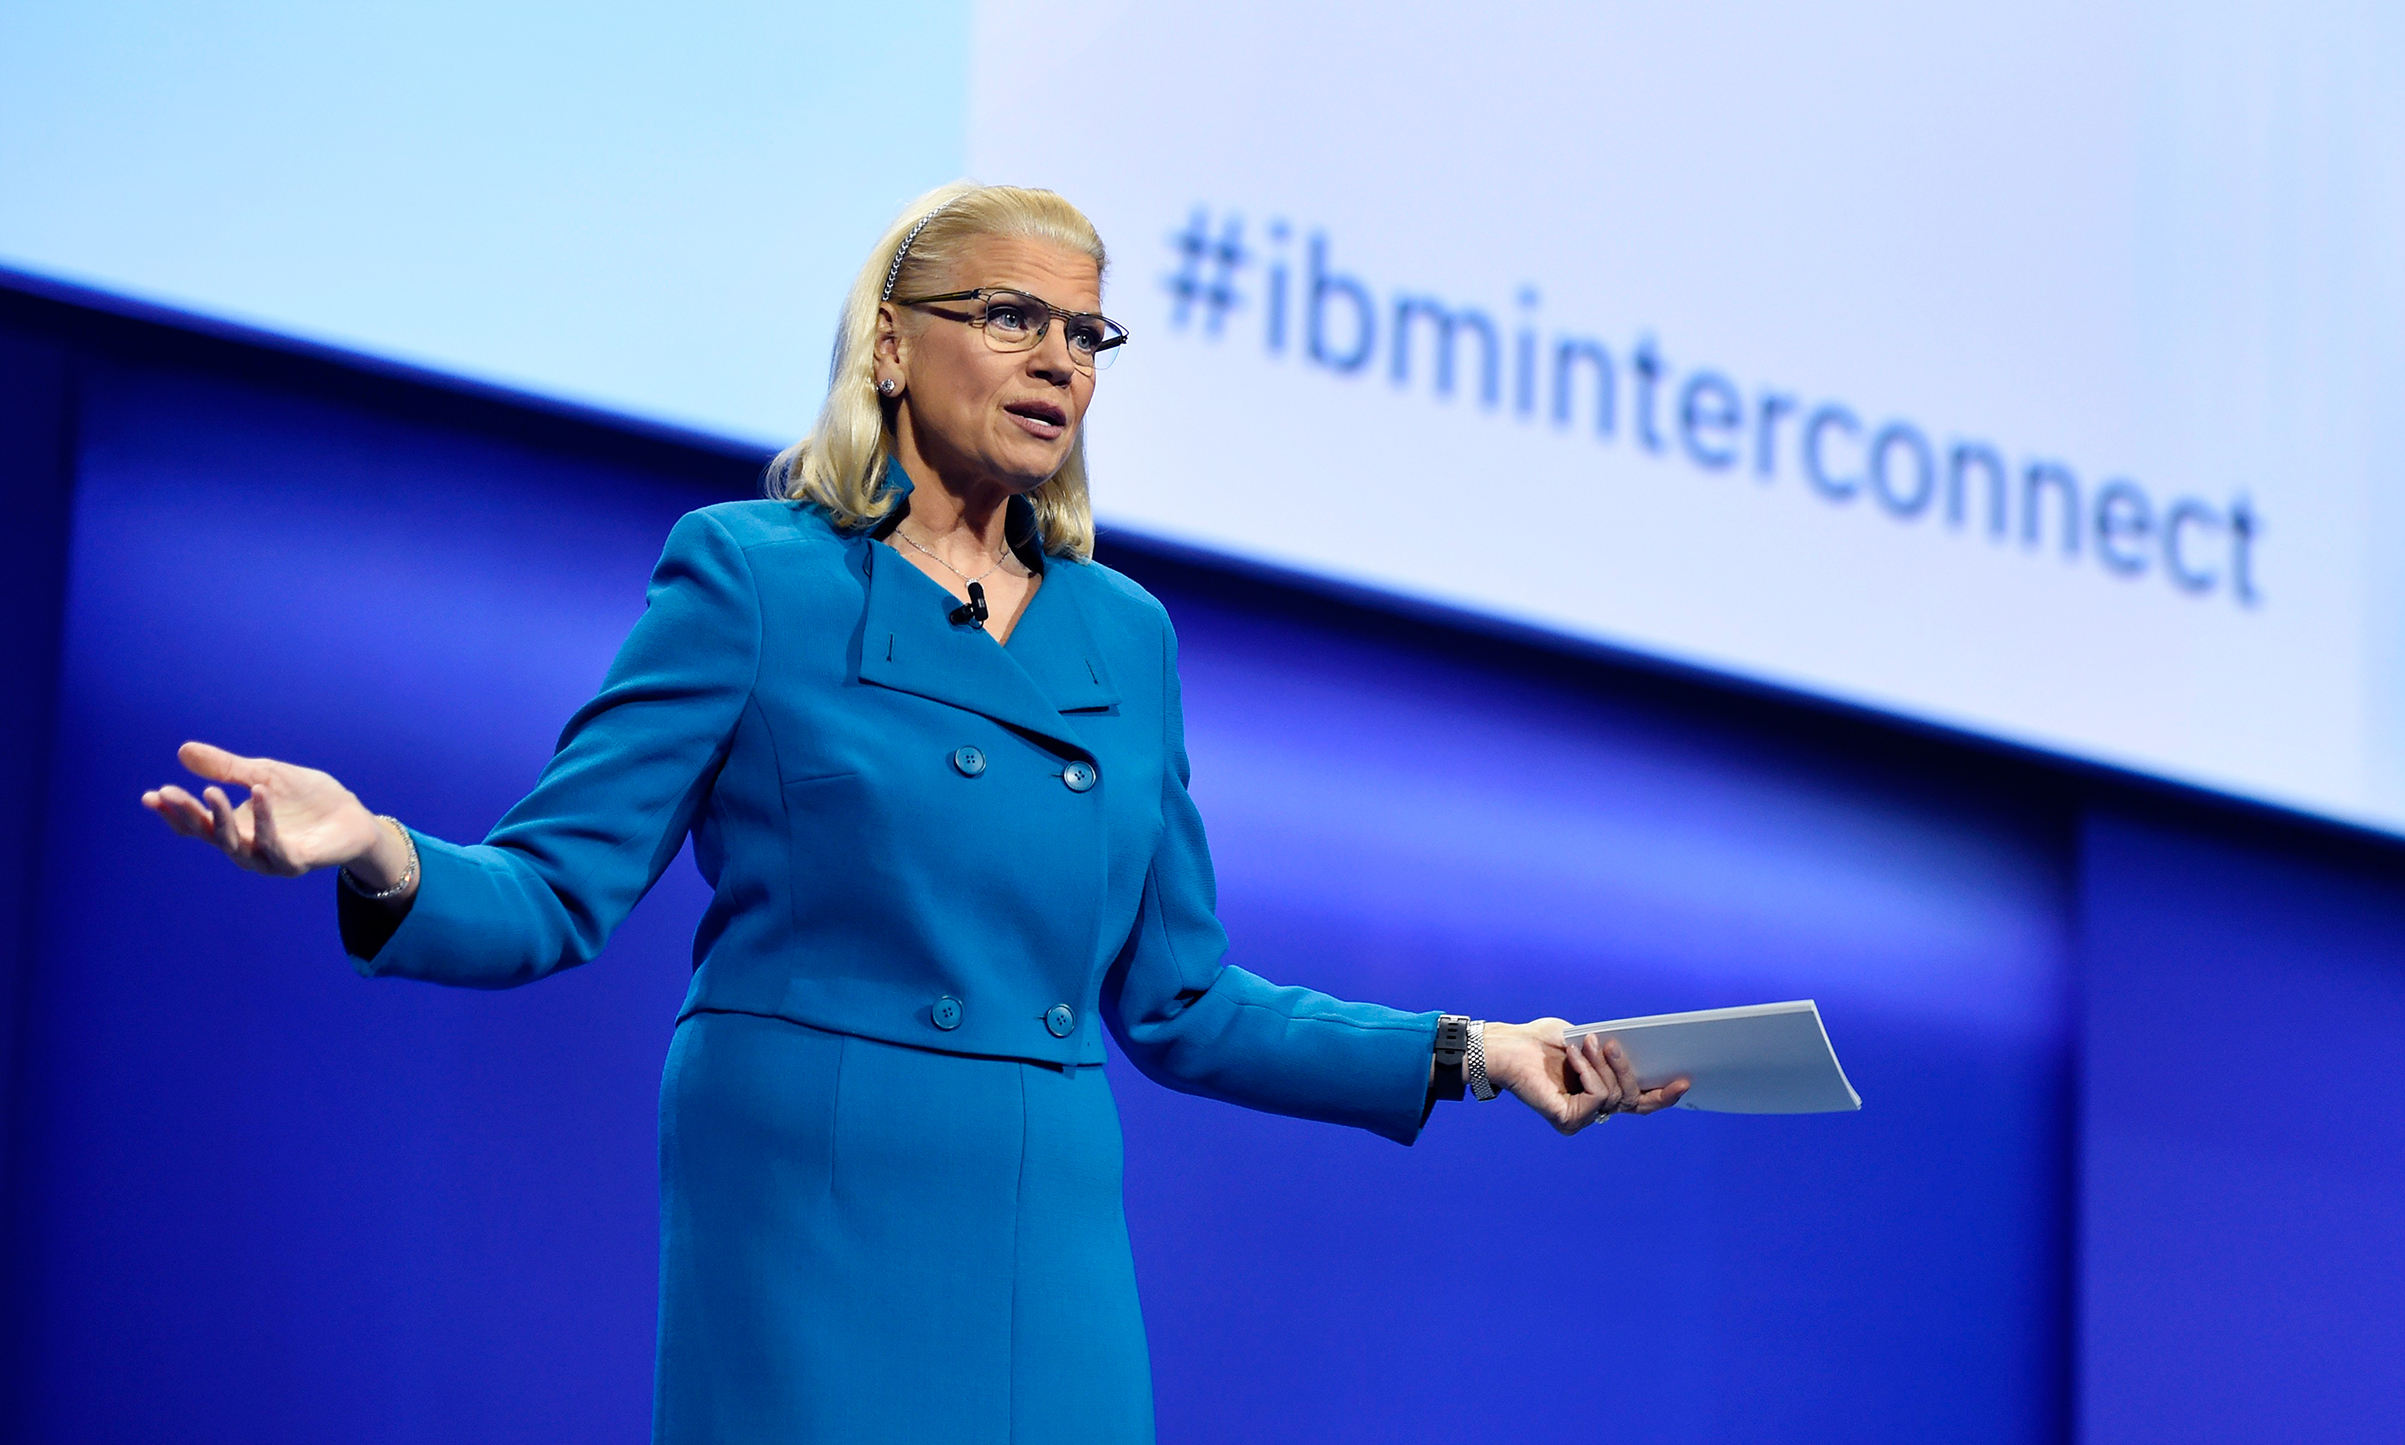 Ginni Rometty, chief executive officer of IBM, speaks during the IBM InterConnect 2017 conference in Las Vegas on March 21, 2017. (David Becker—Bloomberg/Getty Images)